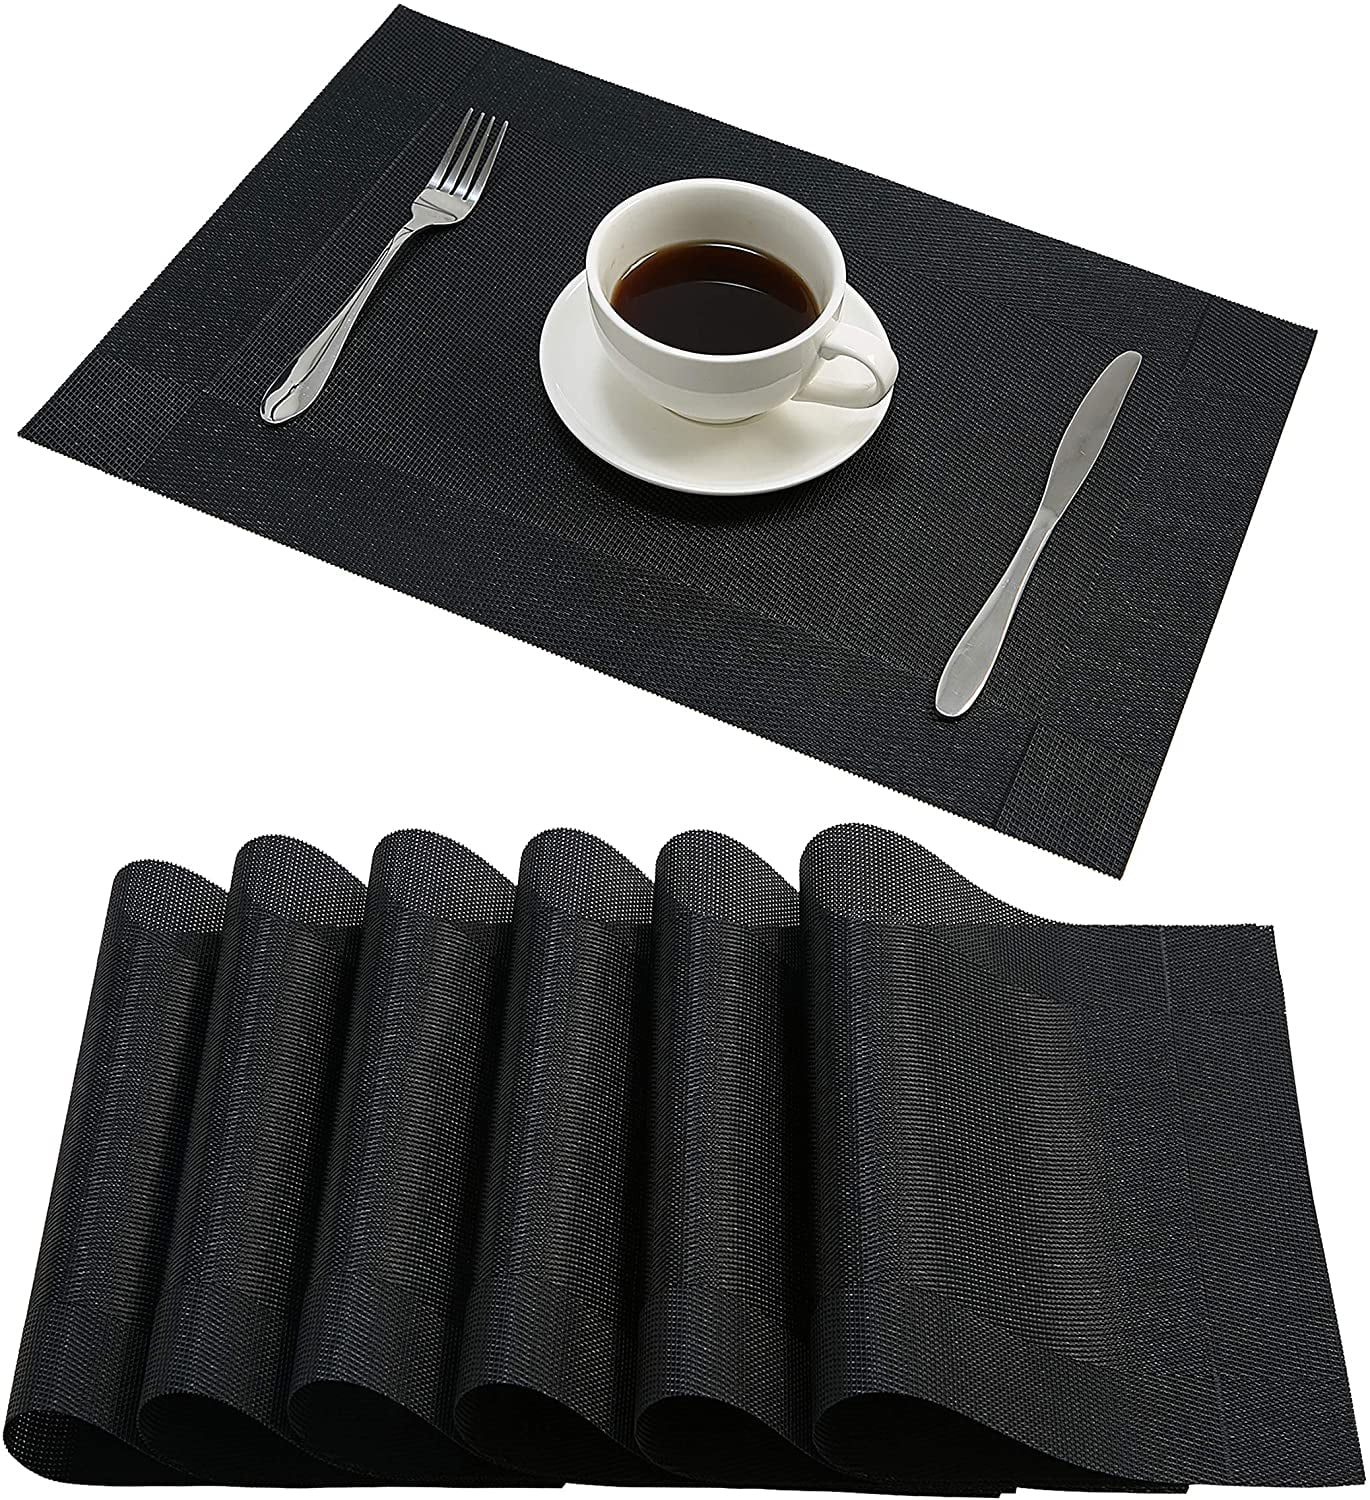 Table Mats Tableware Mats Pads New Tie-dyed Cotton Cloth Placemat Double Mats 